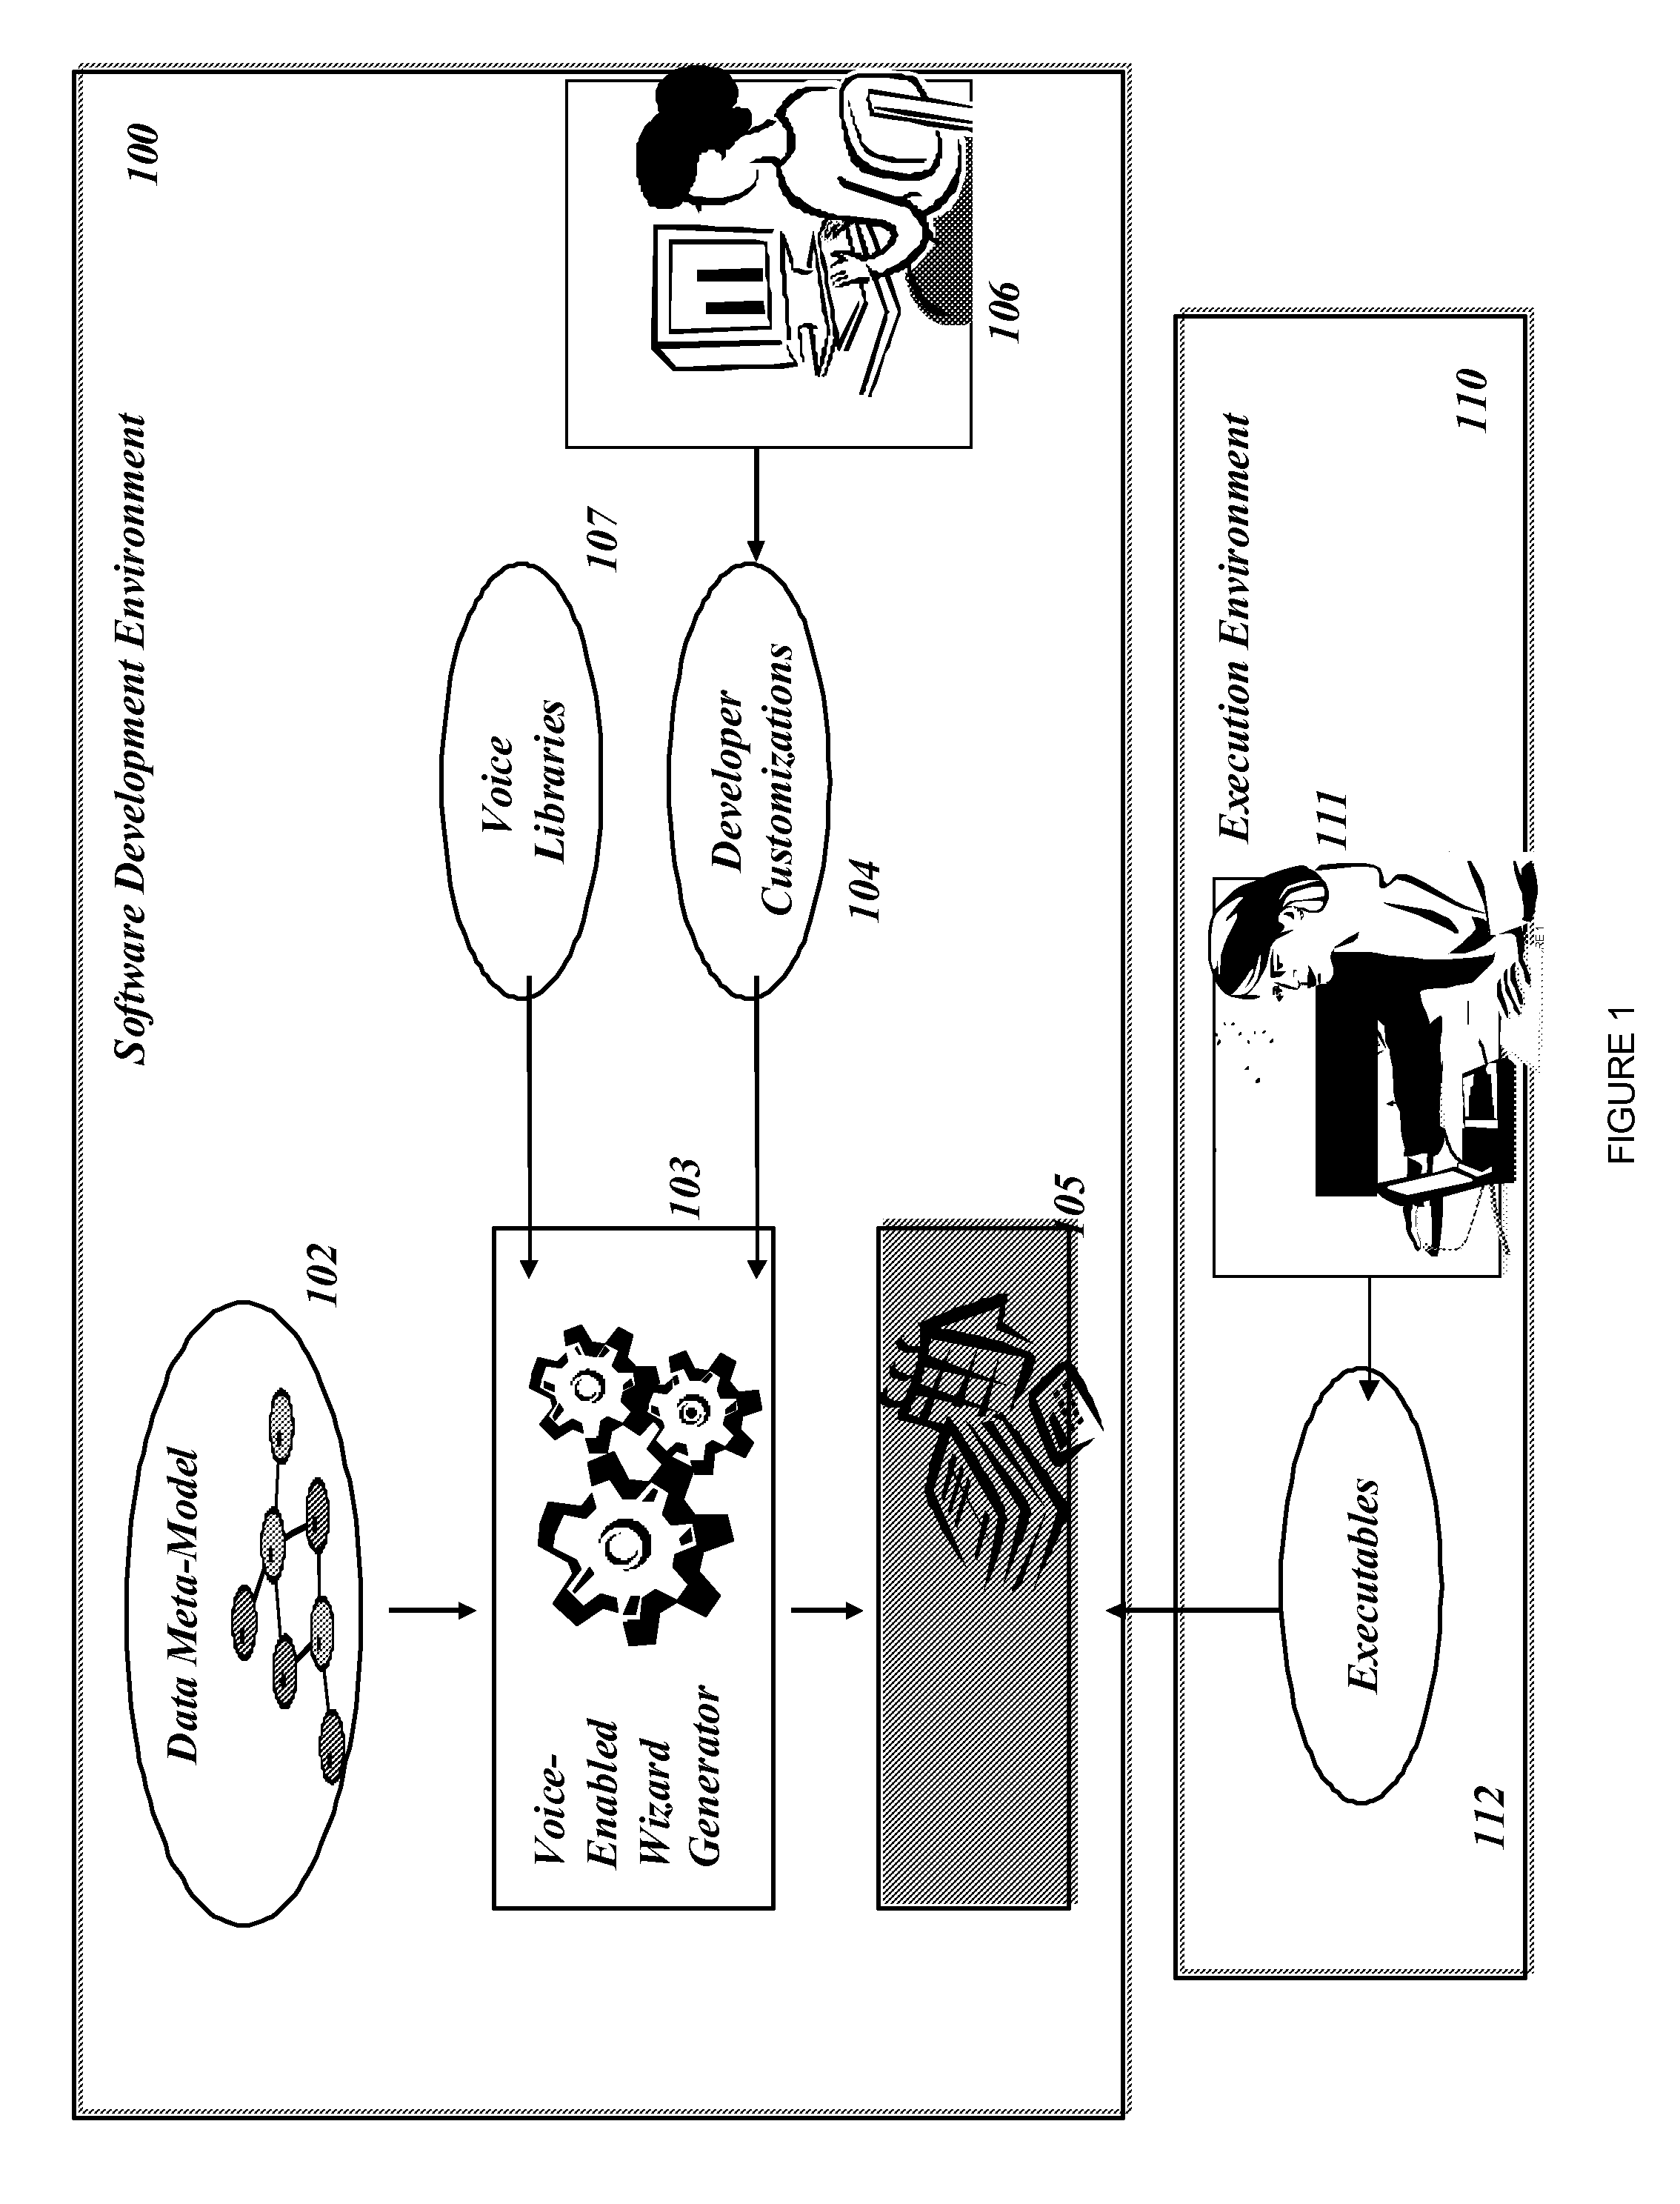 Method and system for generating vocal user interface code from a data metal-model